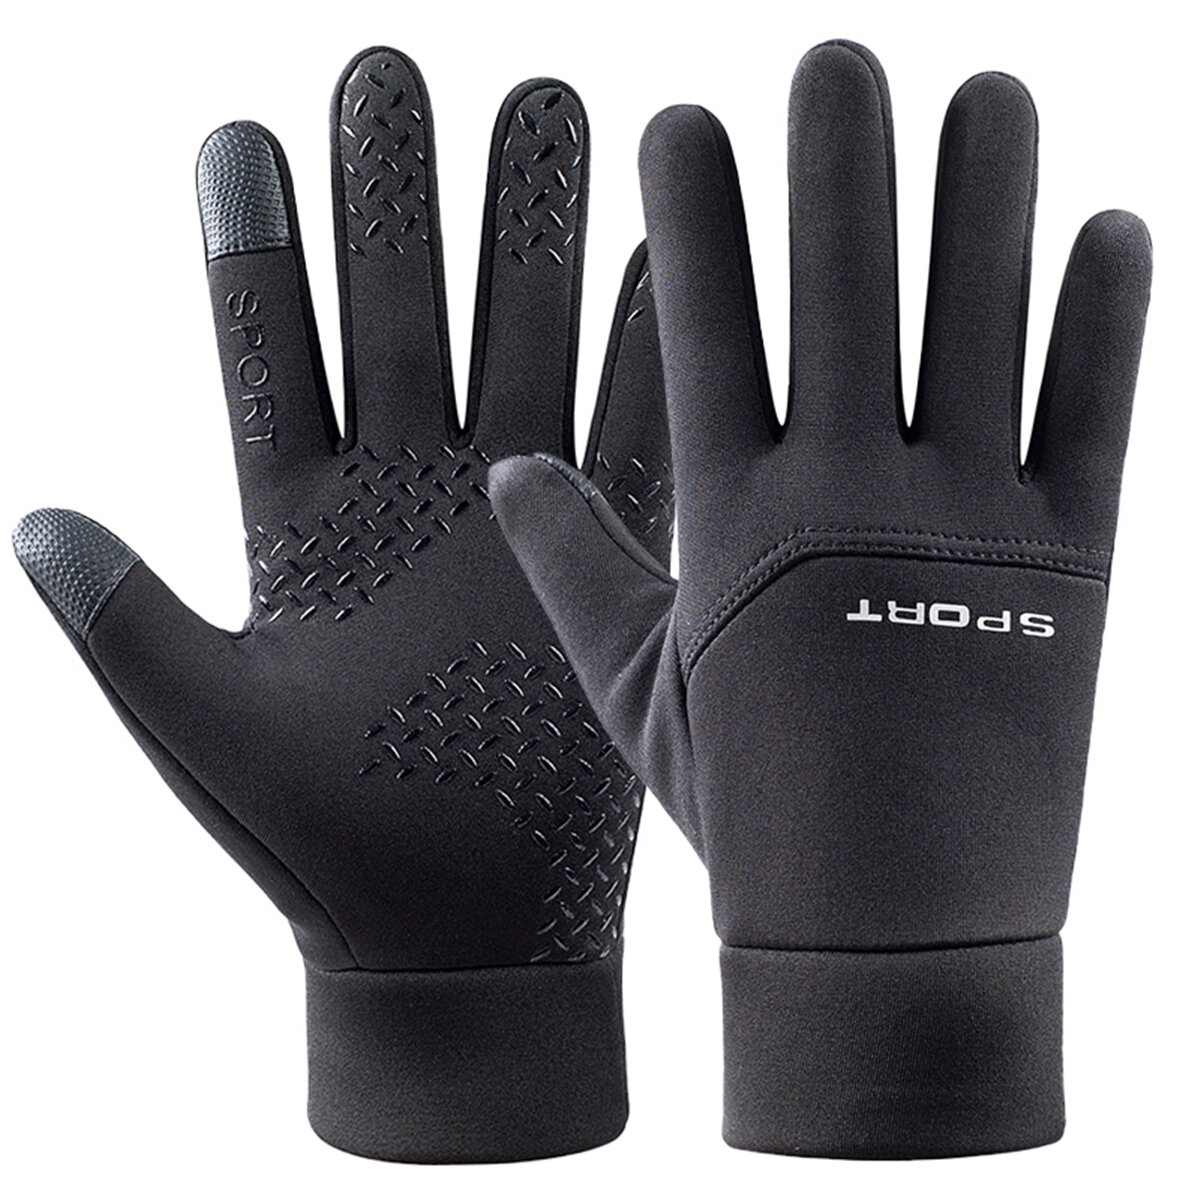 Winter Touch Screen Gloves Windproof Warm Anti-slip Cycling Climbing Hiking Sports